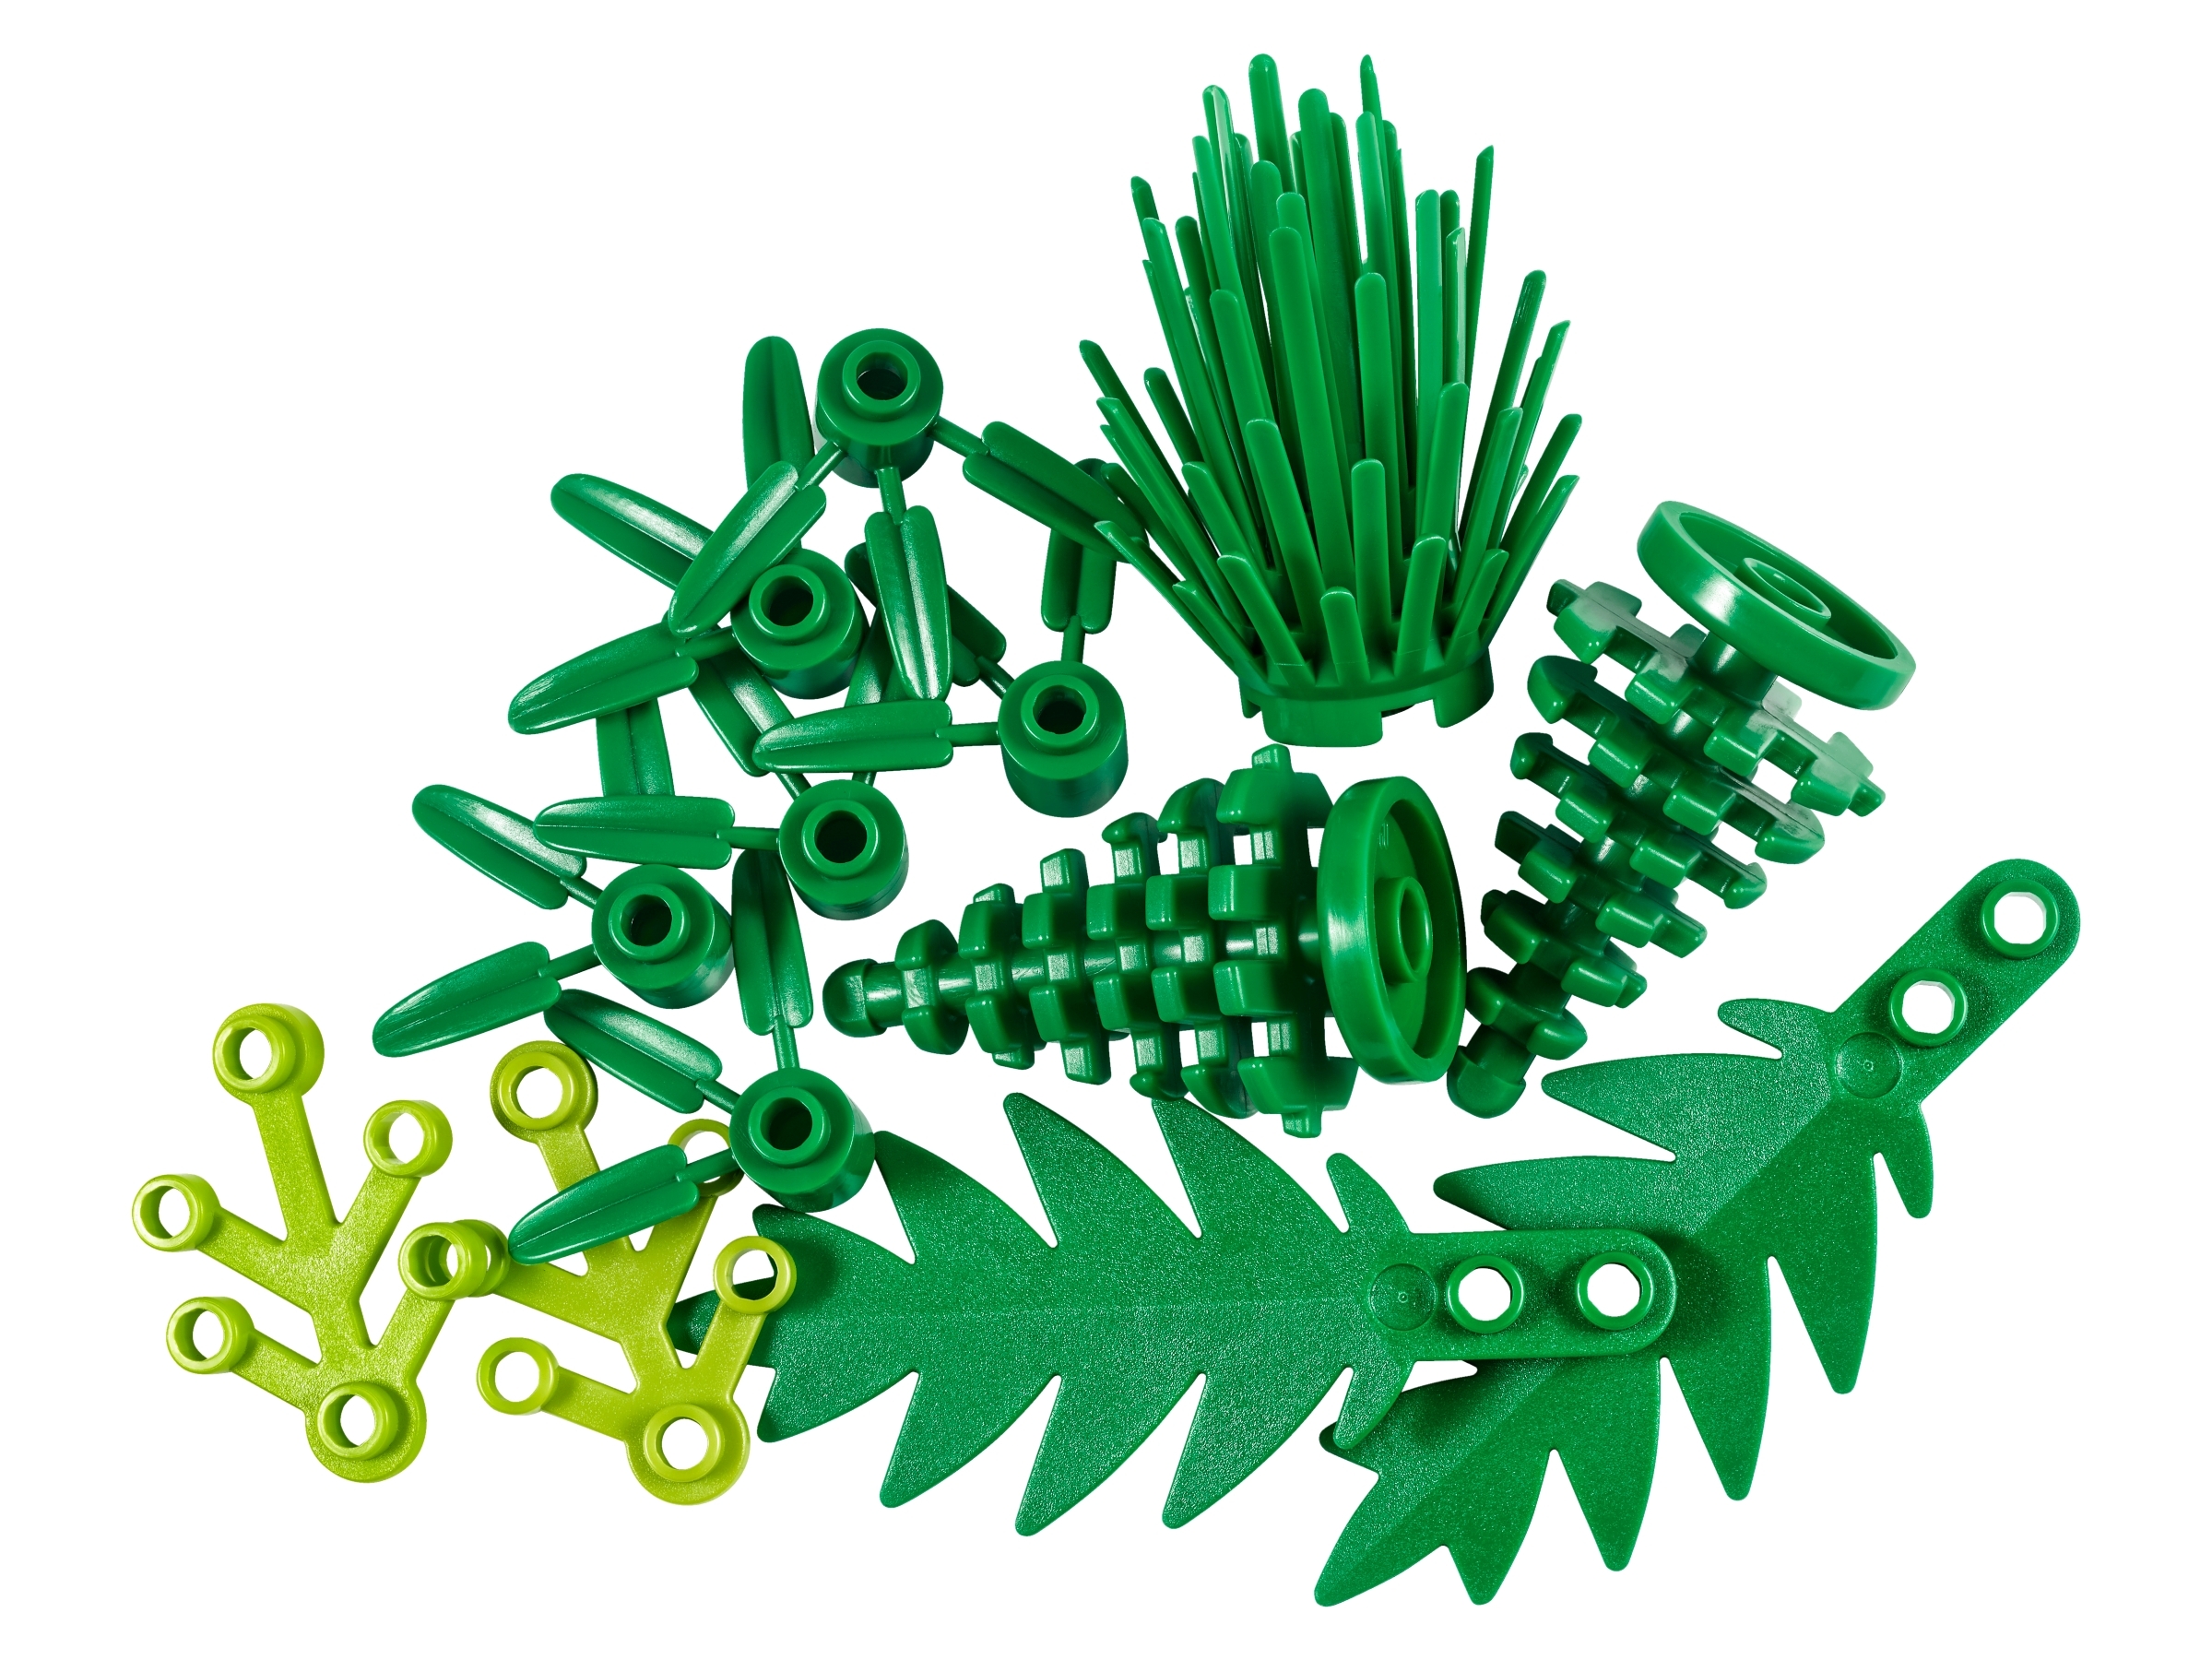 LEGO Plants From Plants Set 40320 - US